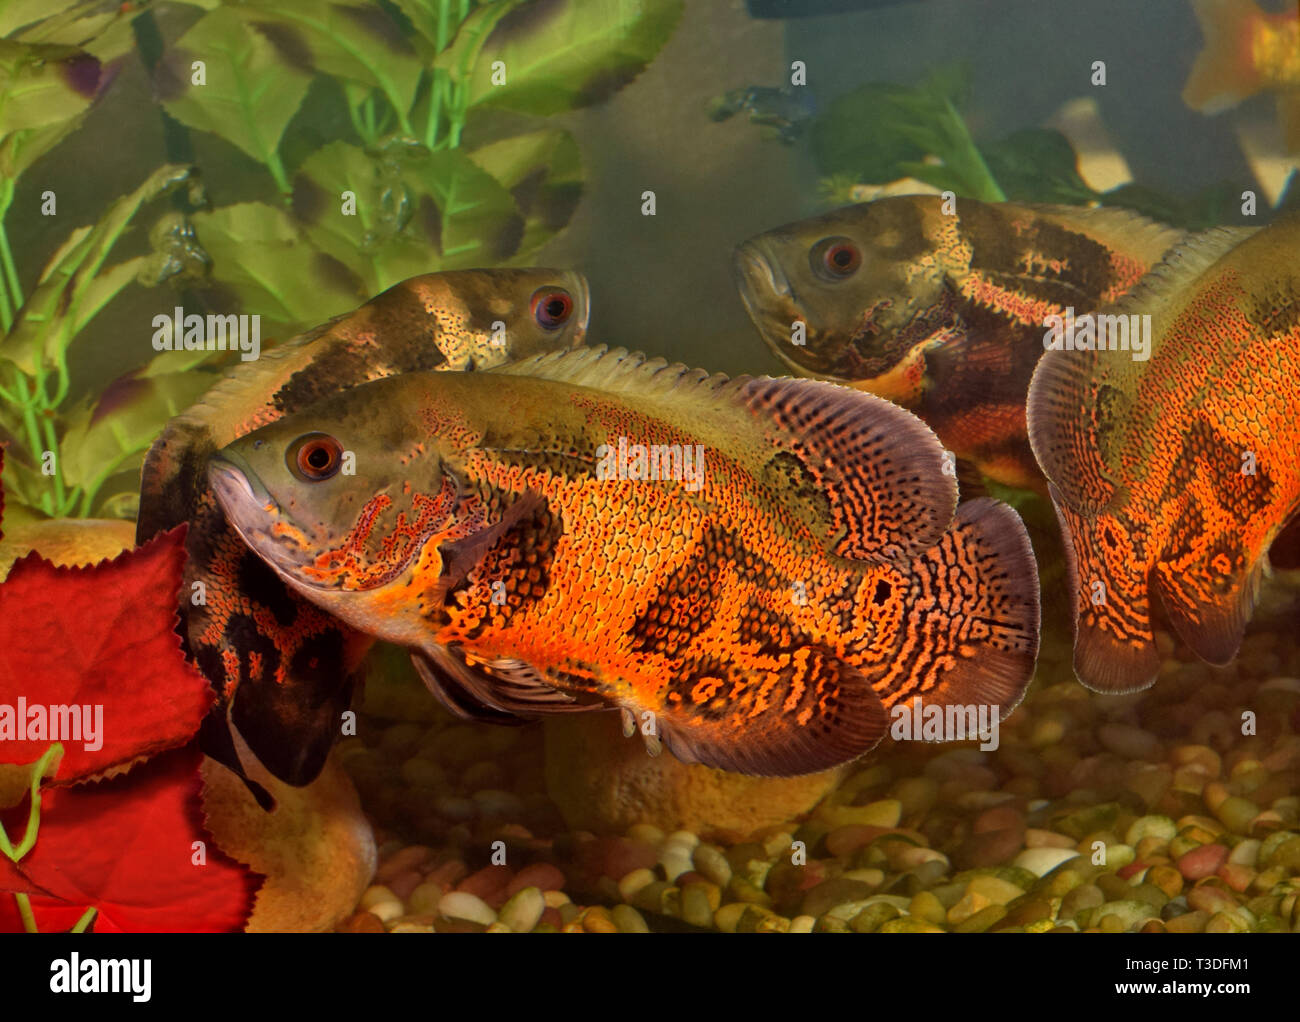 Two colorful Oscar fish (Astronotus ocellatus) in an aquarium. They are at one end of the tank where their reflections mirror their movement. Stock Photo